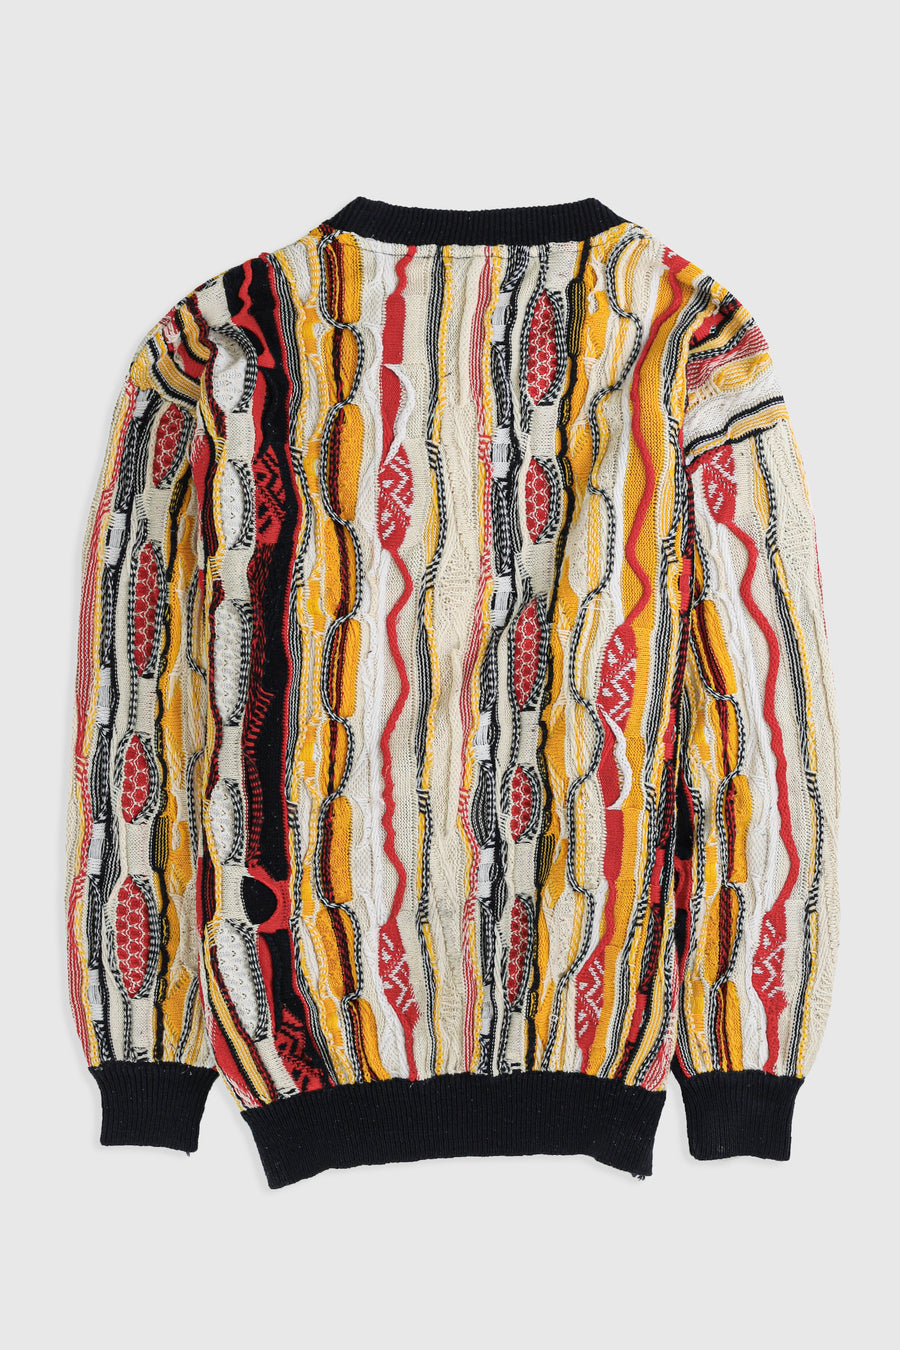 Vintage Coogi Style Knit Sweater - XL